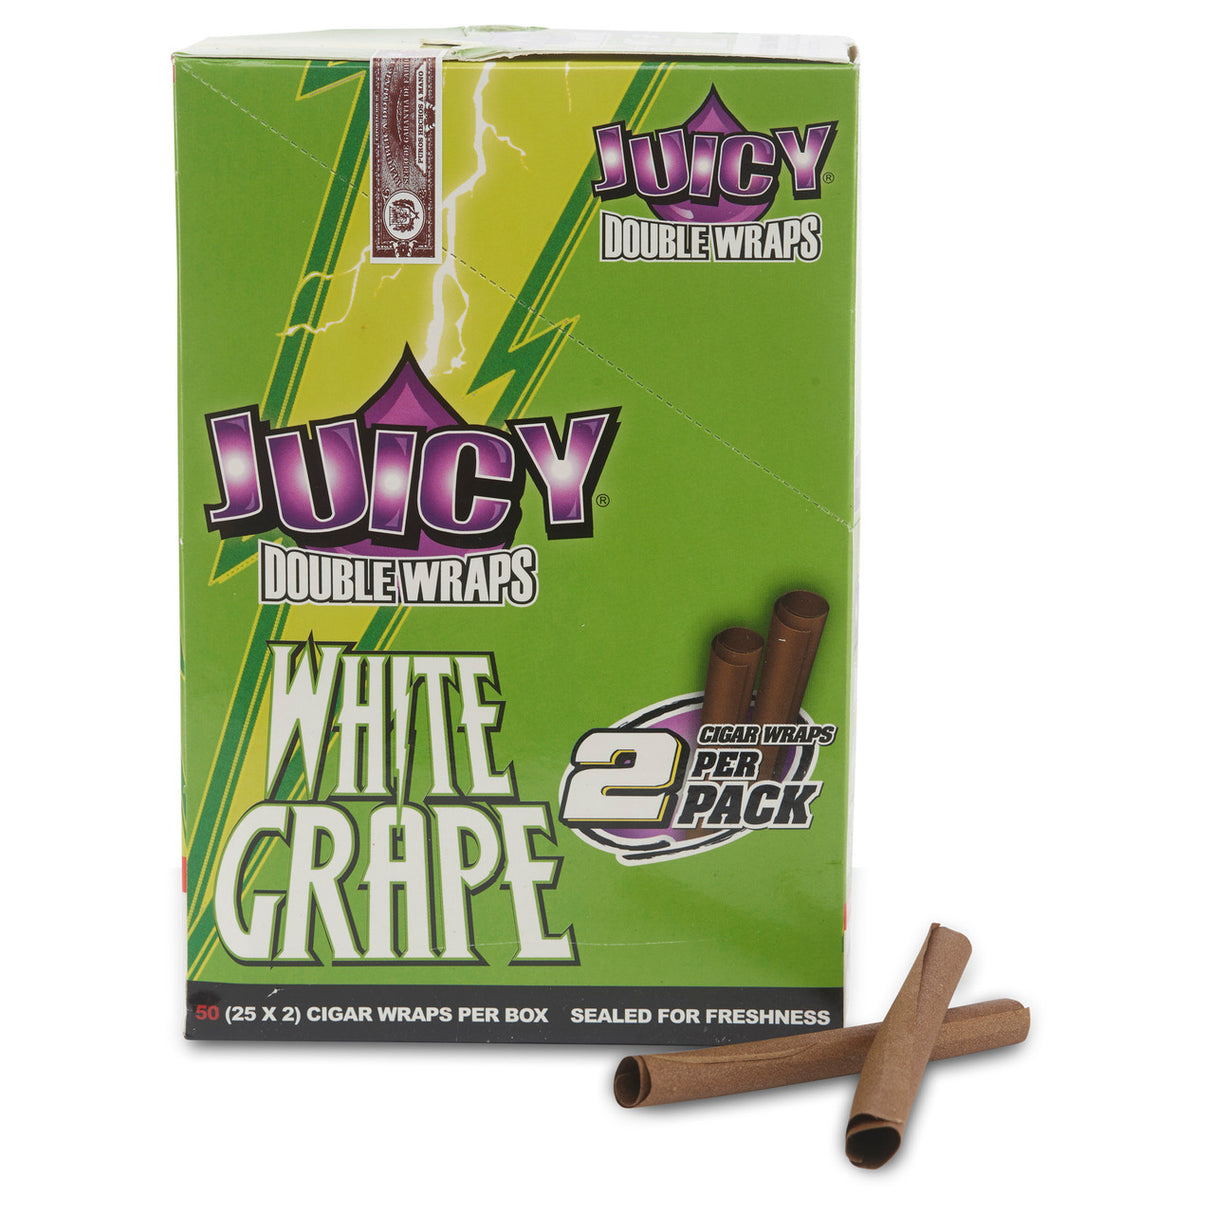 white grape blunt wraps for sale online in packs of 2